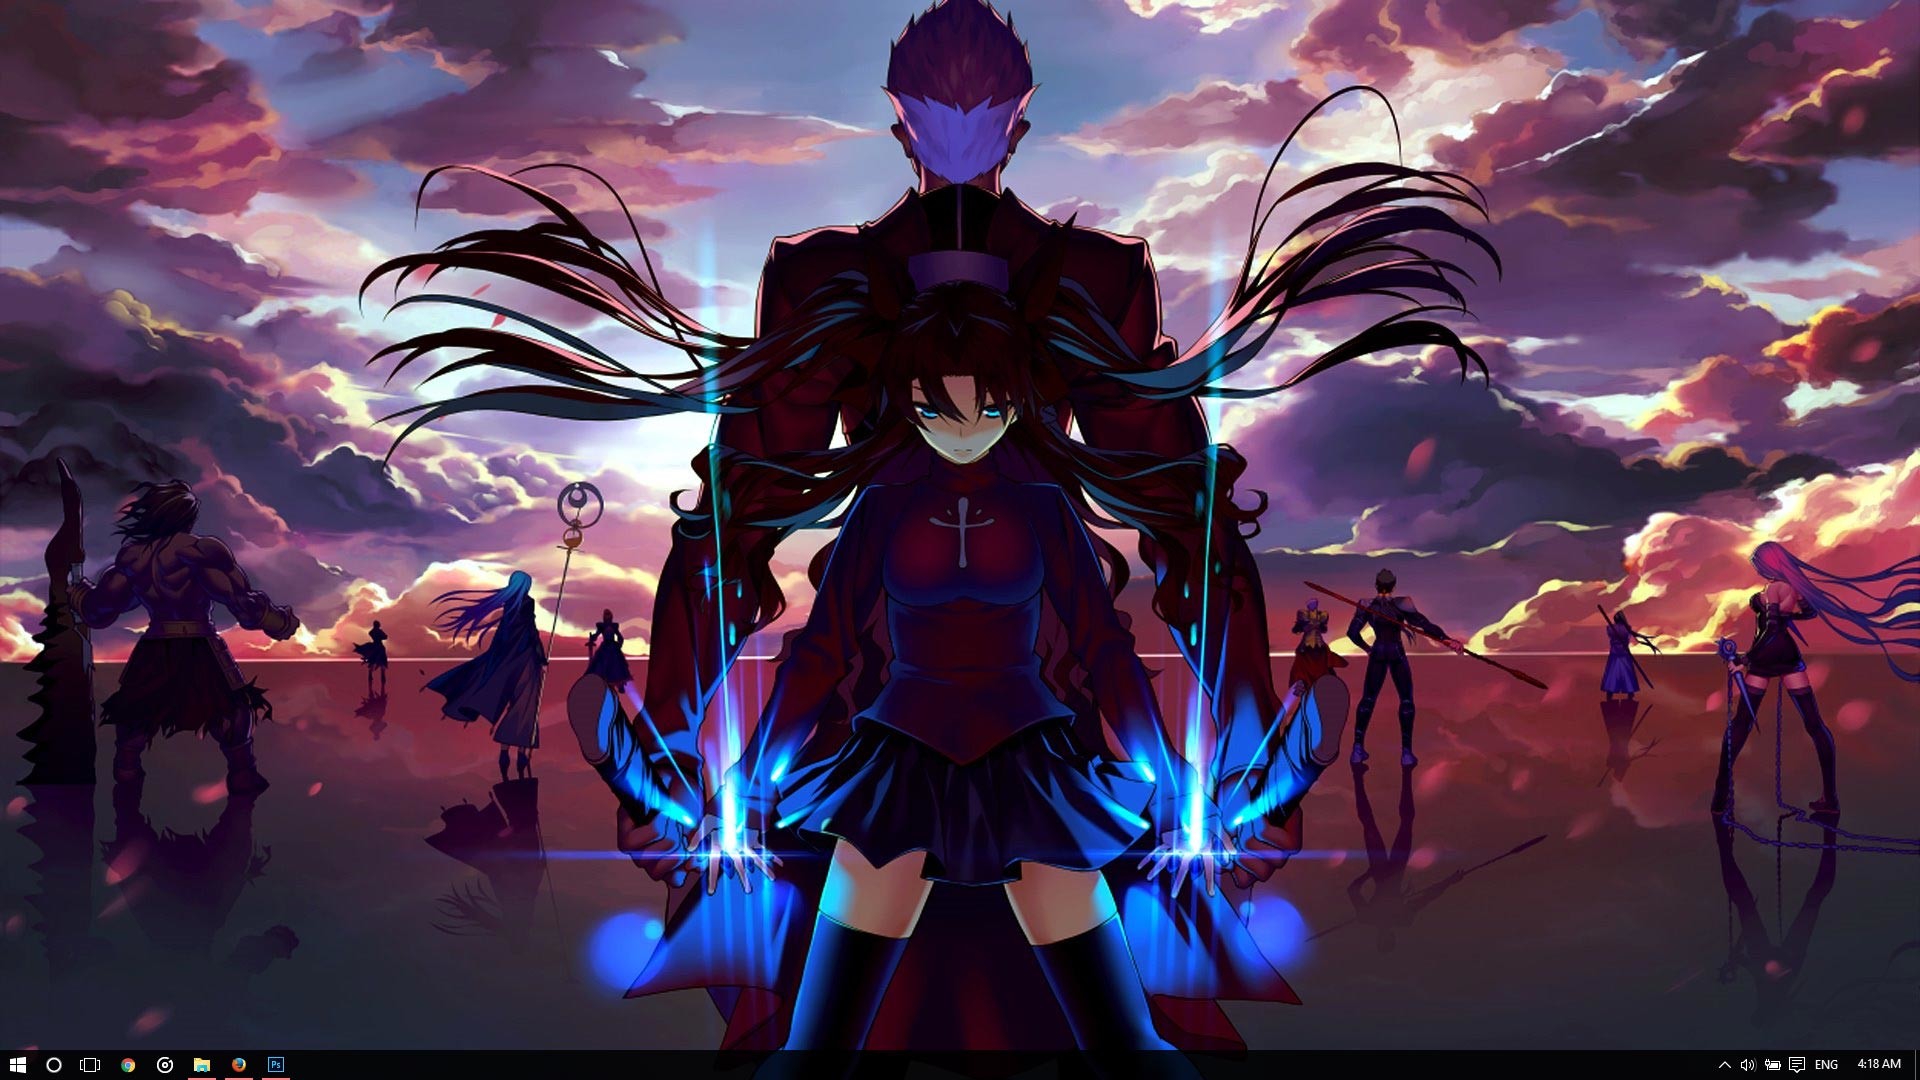 1920x1080 ... Archer and Saber as they face conflict, with minor appearances from  other servants as well the UBW Noble Phantasm in action for this Windows  theme.